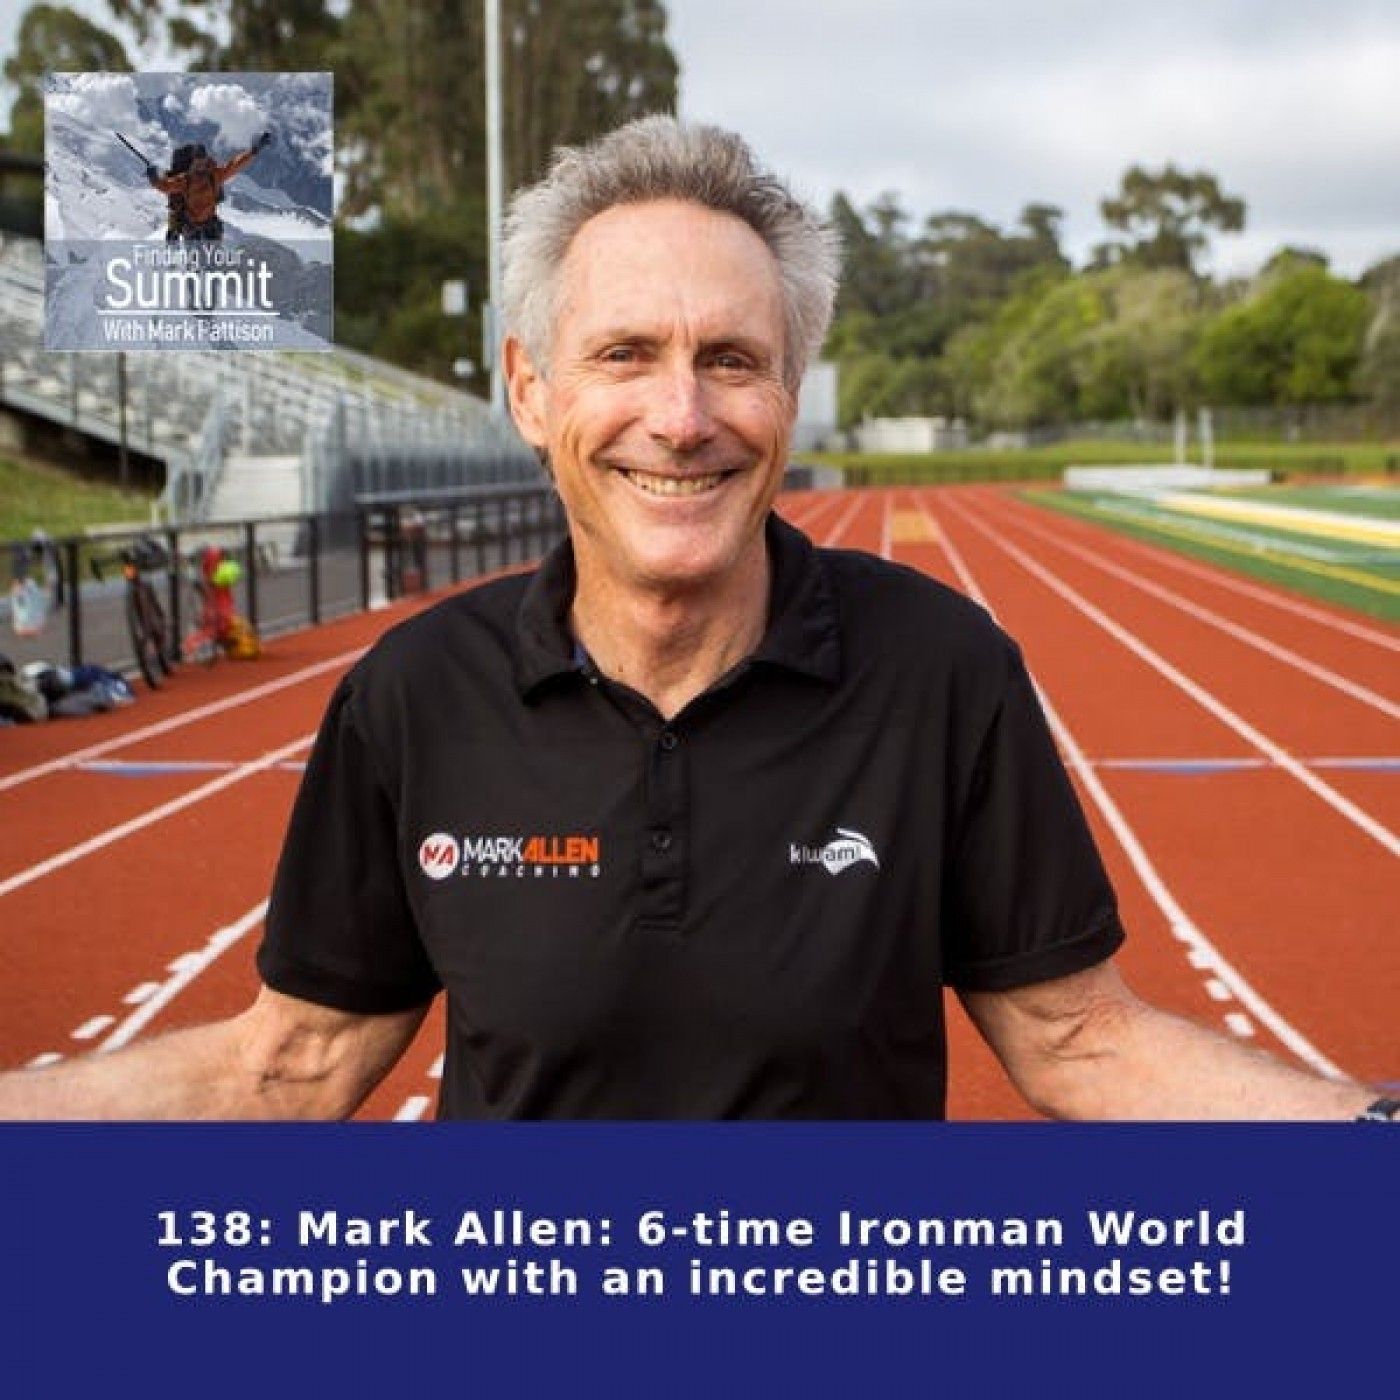 Mark Allen: 6-time Ironman World Champion with an incredible mindset!